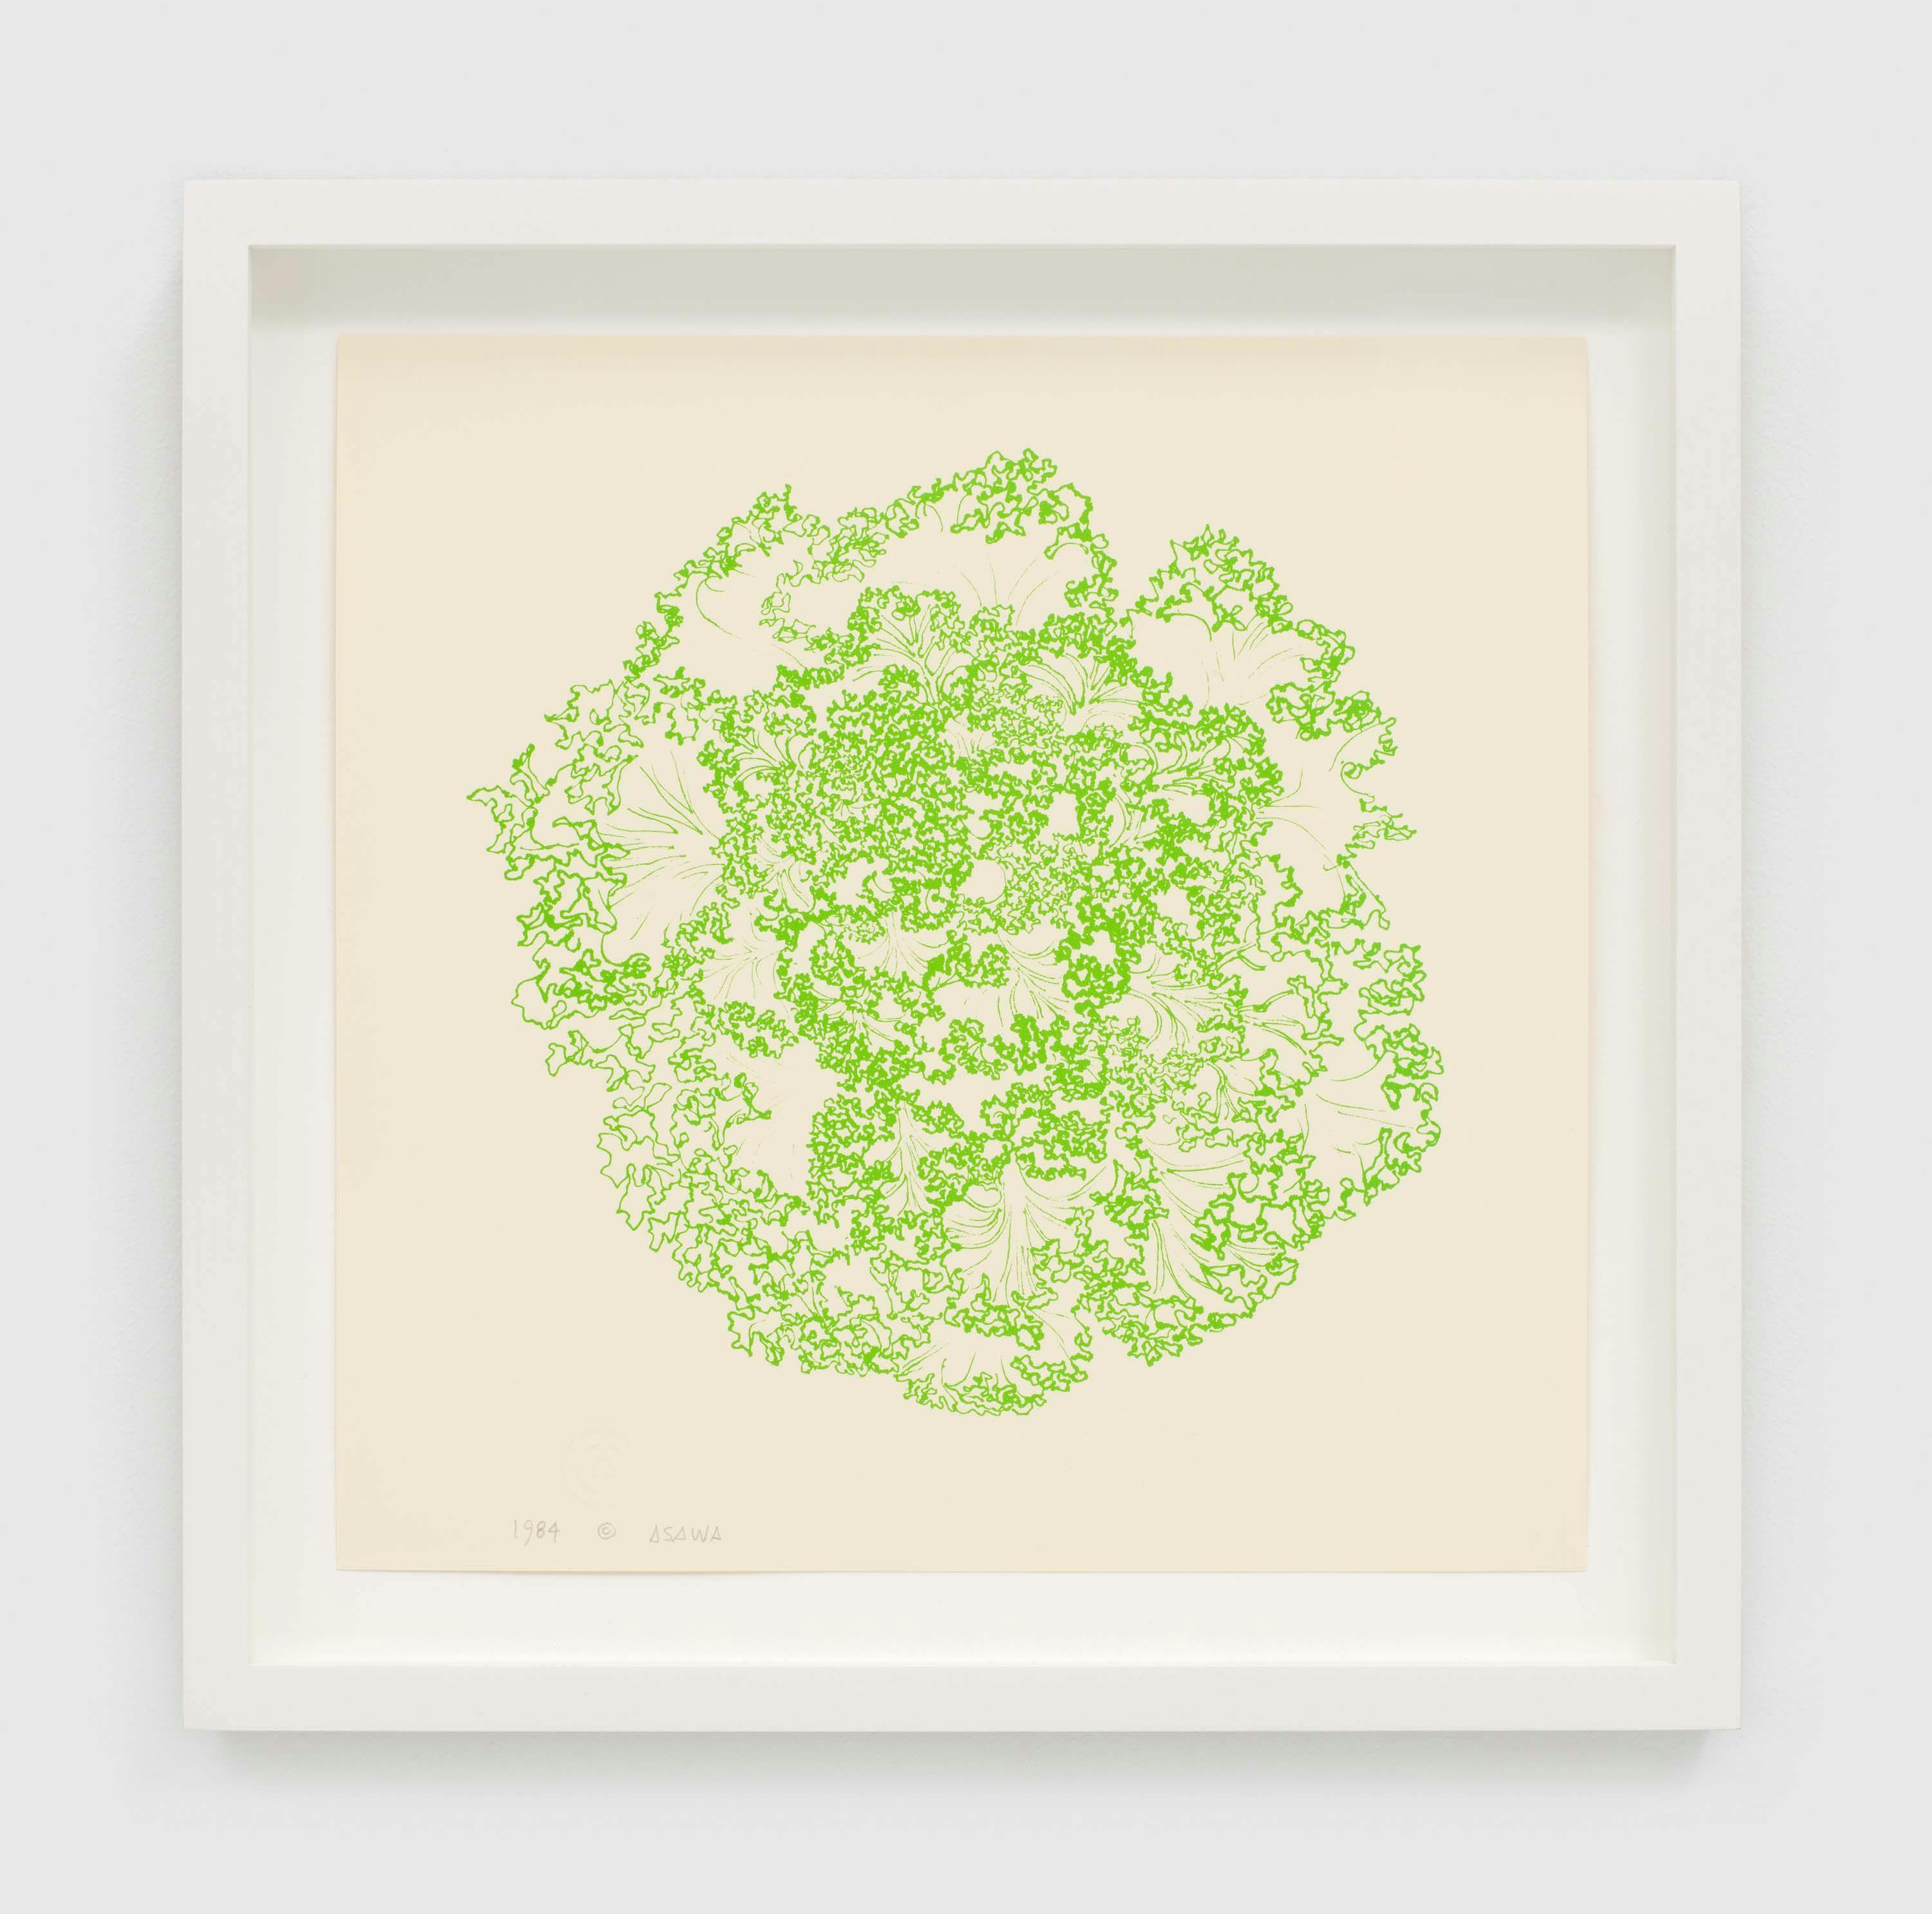 A print by Ruth Asawa, titled Cabbage (P.021), dated 1984.